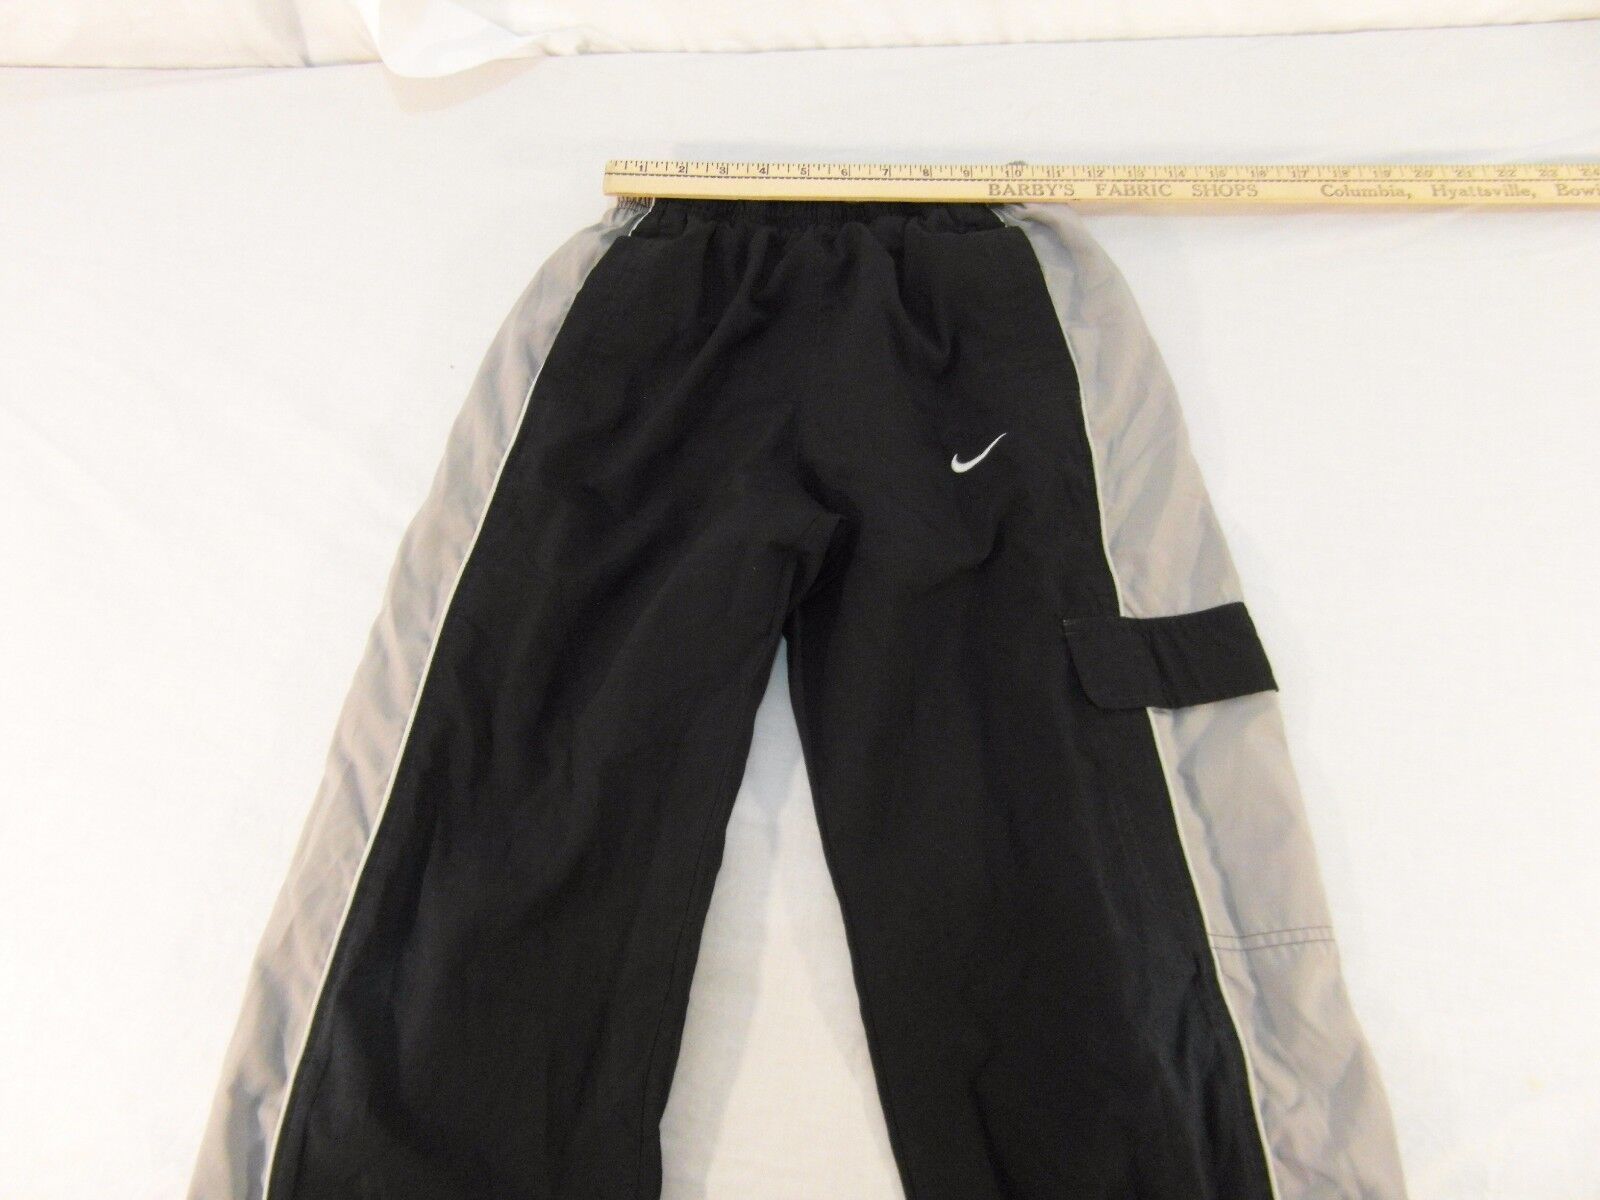 Primary image for Children Youth Boy's Nike Lined Black Gray Stripe Athletic Sweatpants 30832